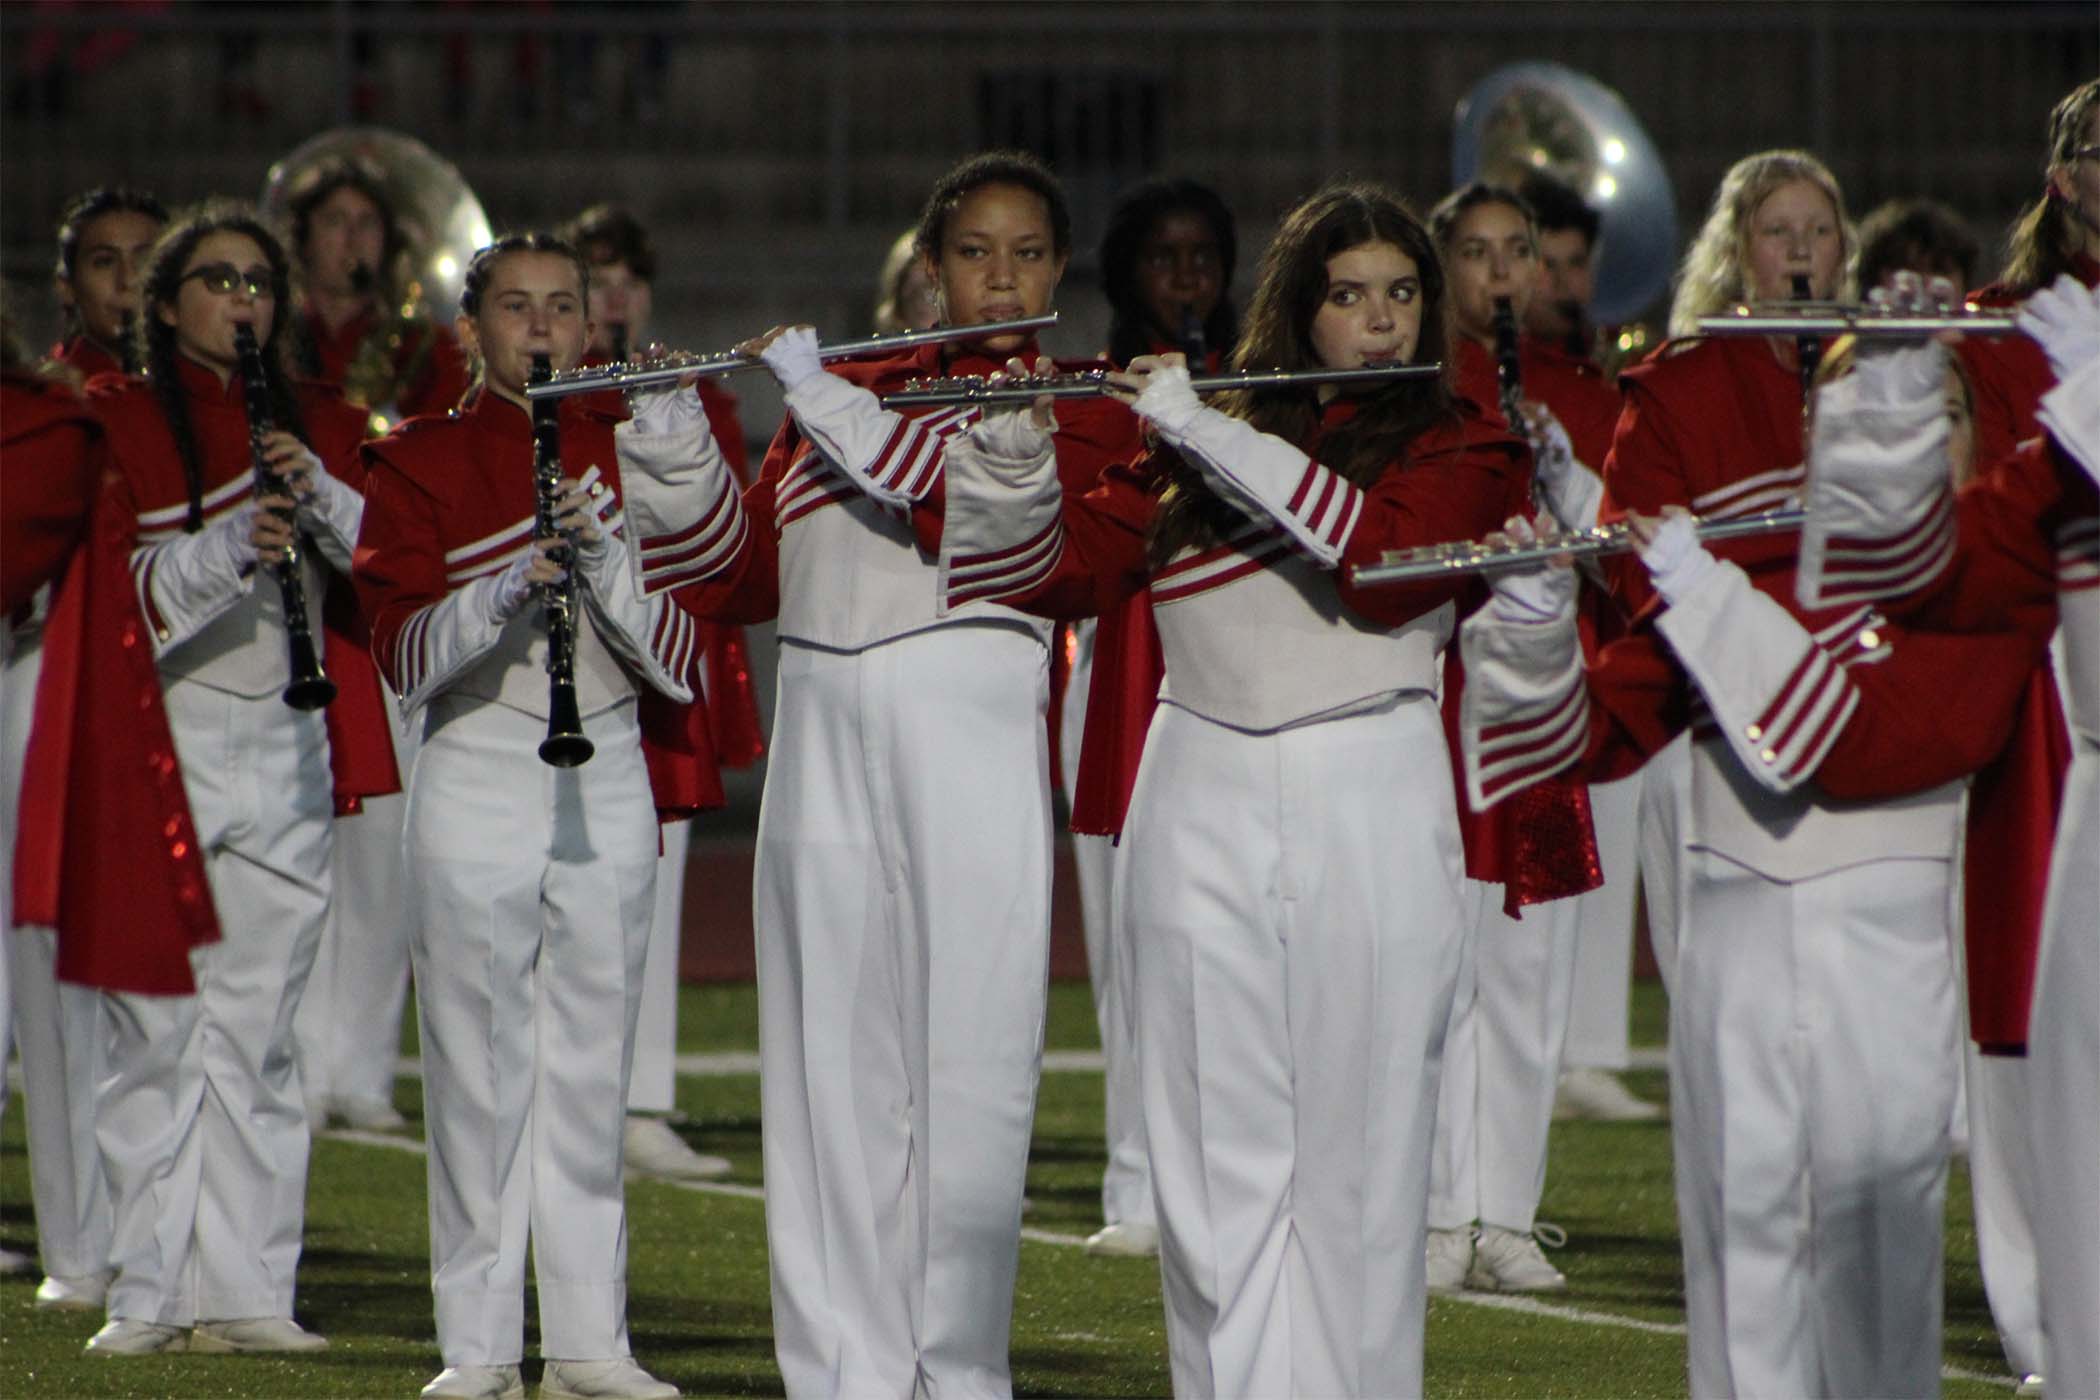 Hewitt-Trussville's Husky Band earns superior ratings